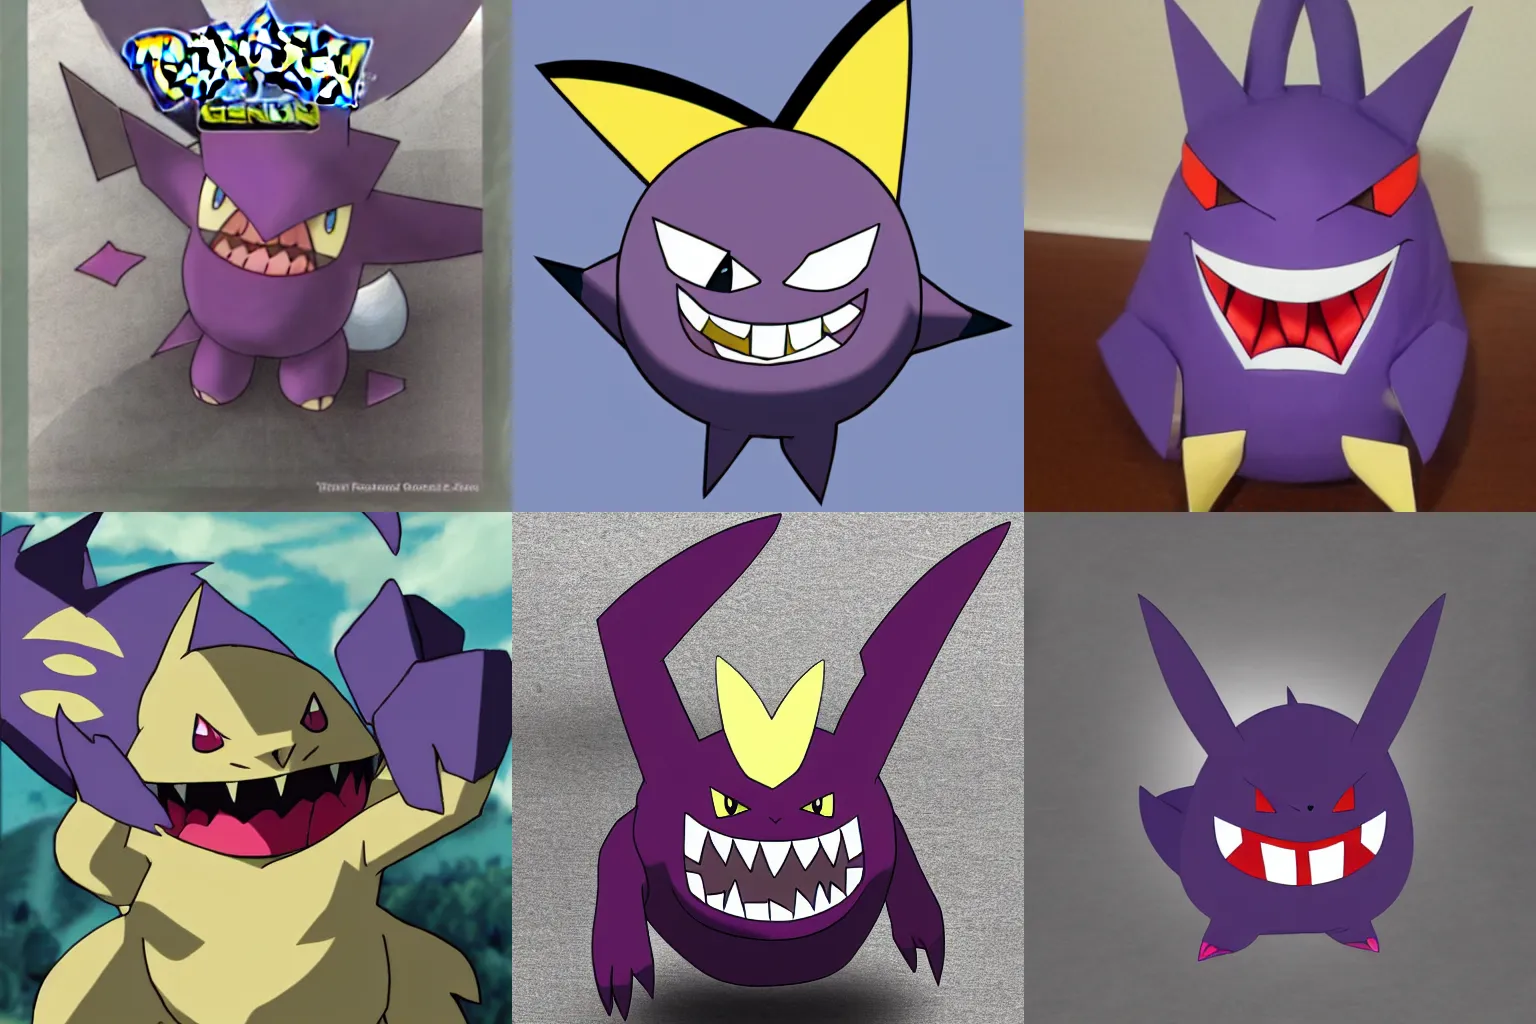 Shiny Gastly, Haunter and Gengar 3D assets discovered in app's